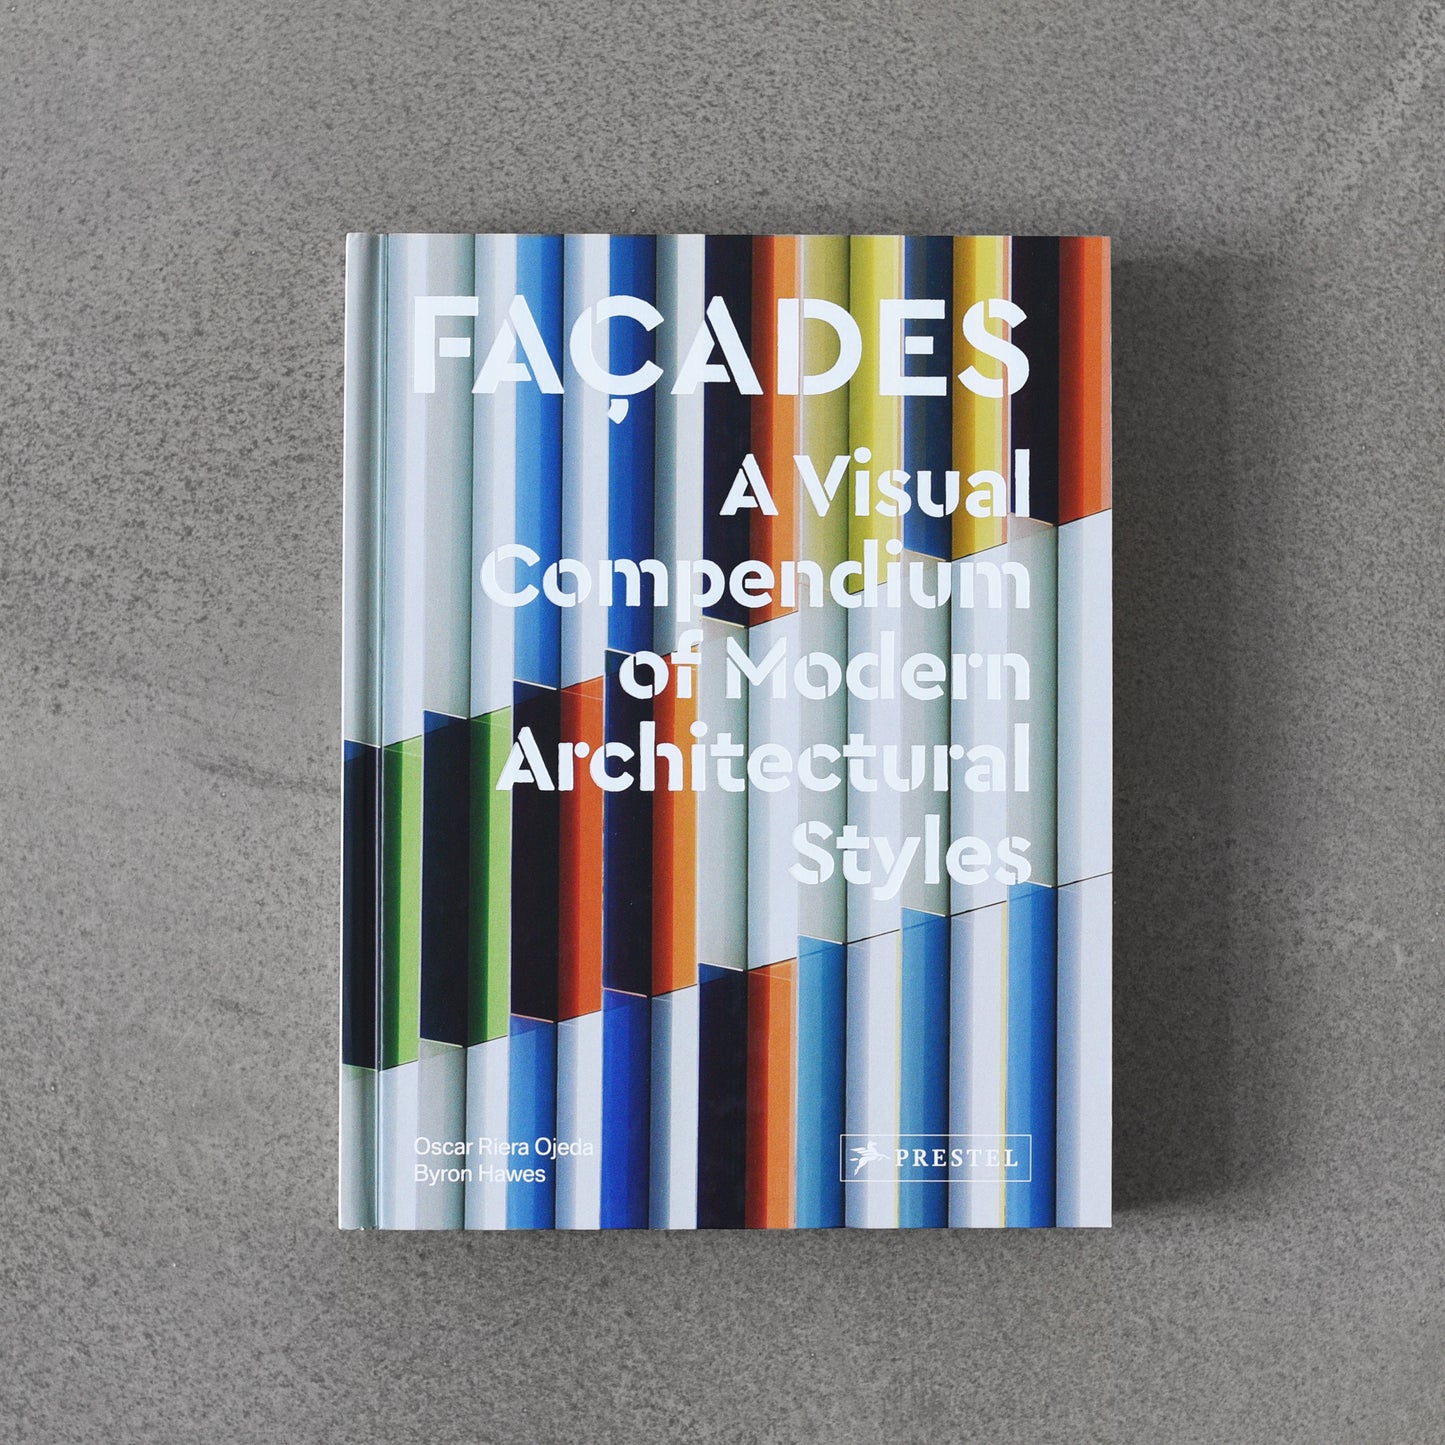 Façades: A Visual Compendium of Modern Architectural Styles - Slovart